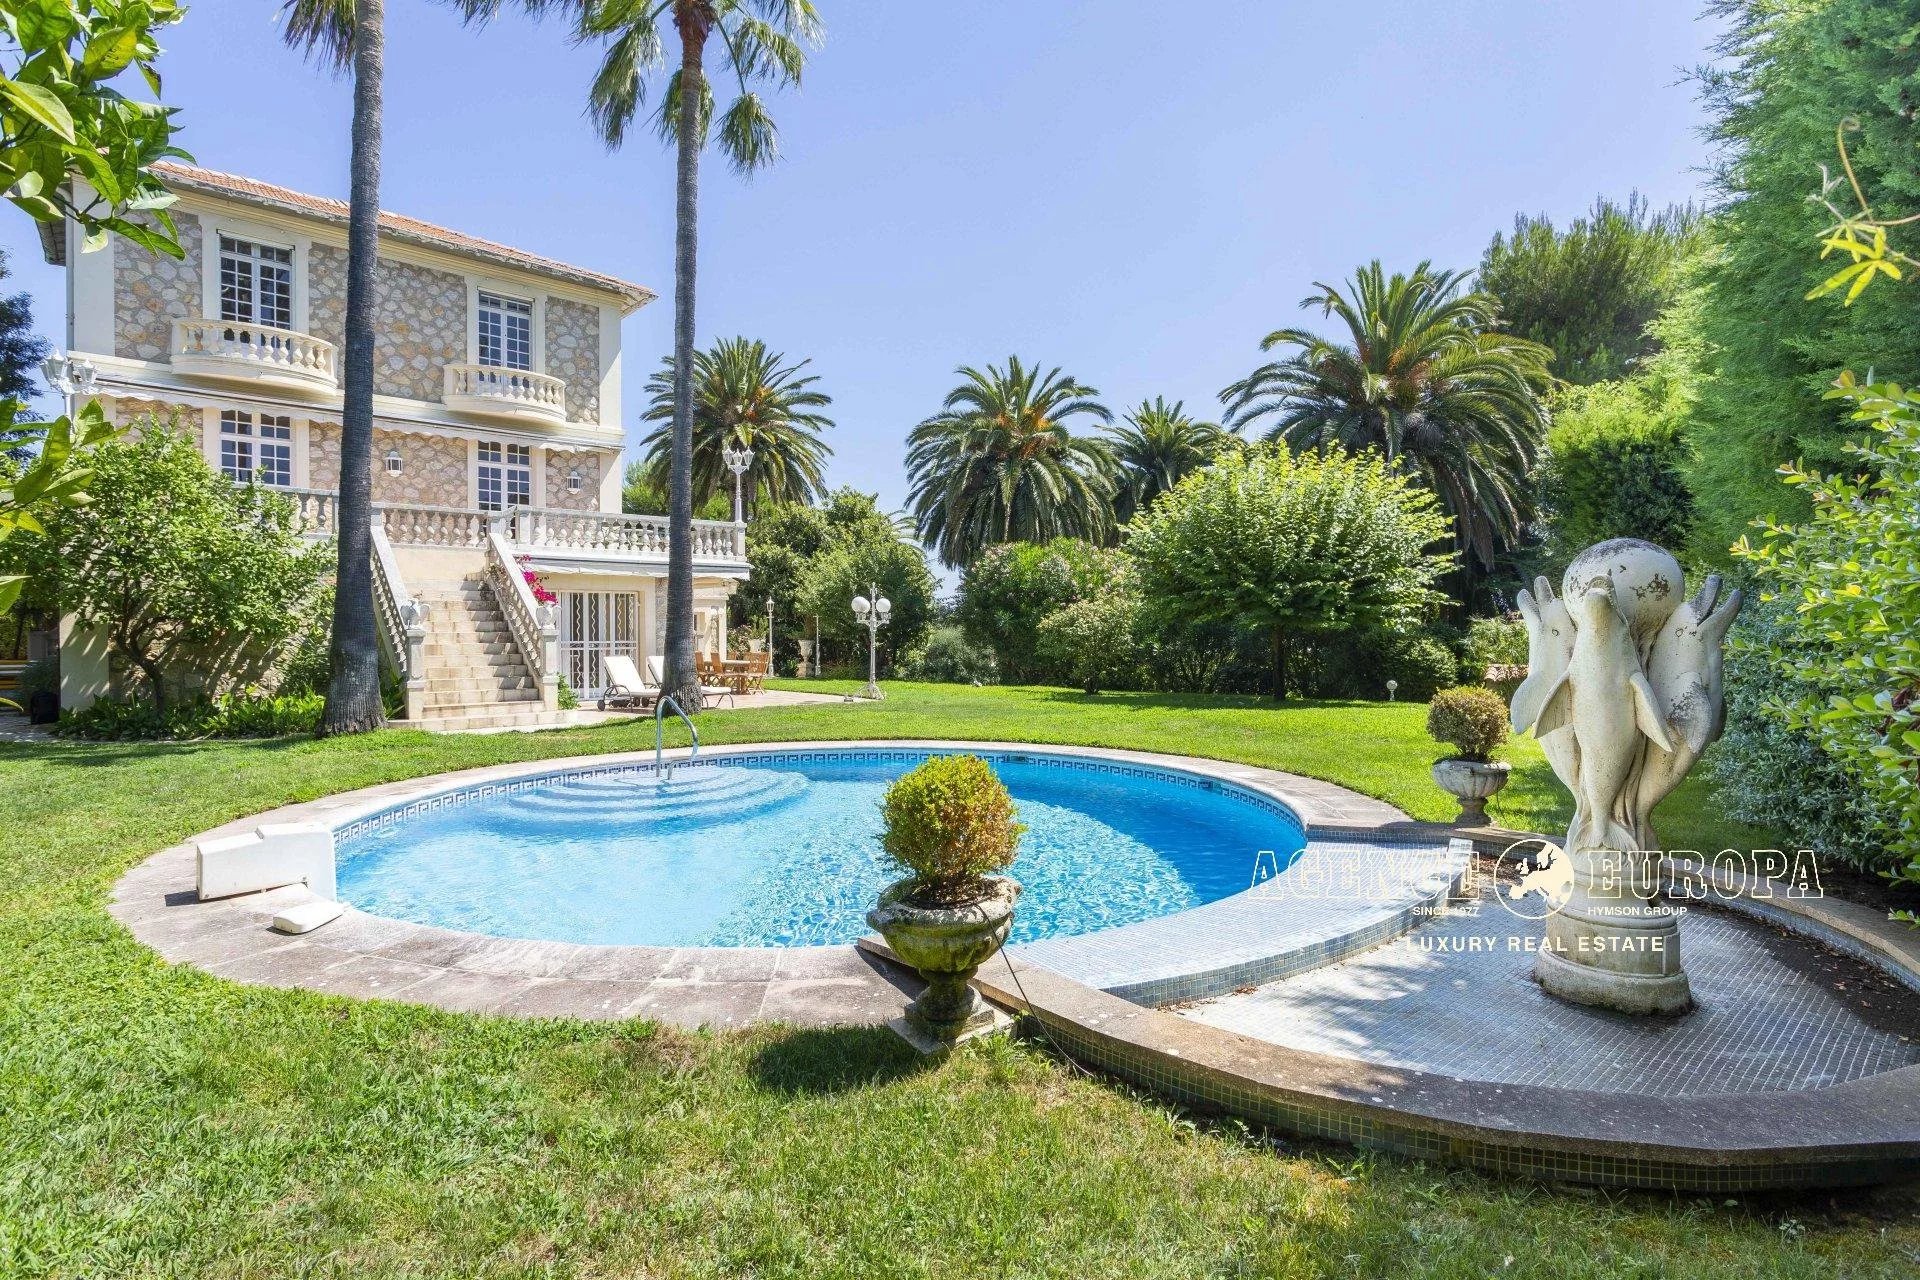 SUPER CANNES - HISTORICAL PERIOD HOUSE